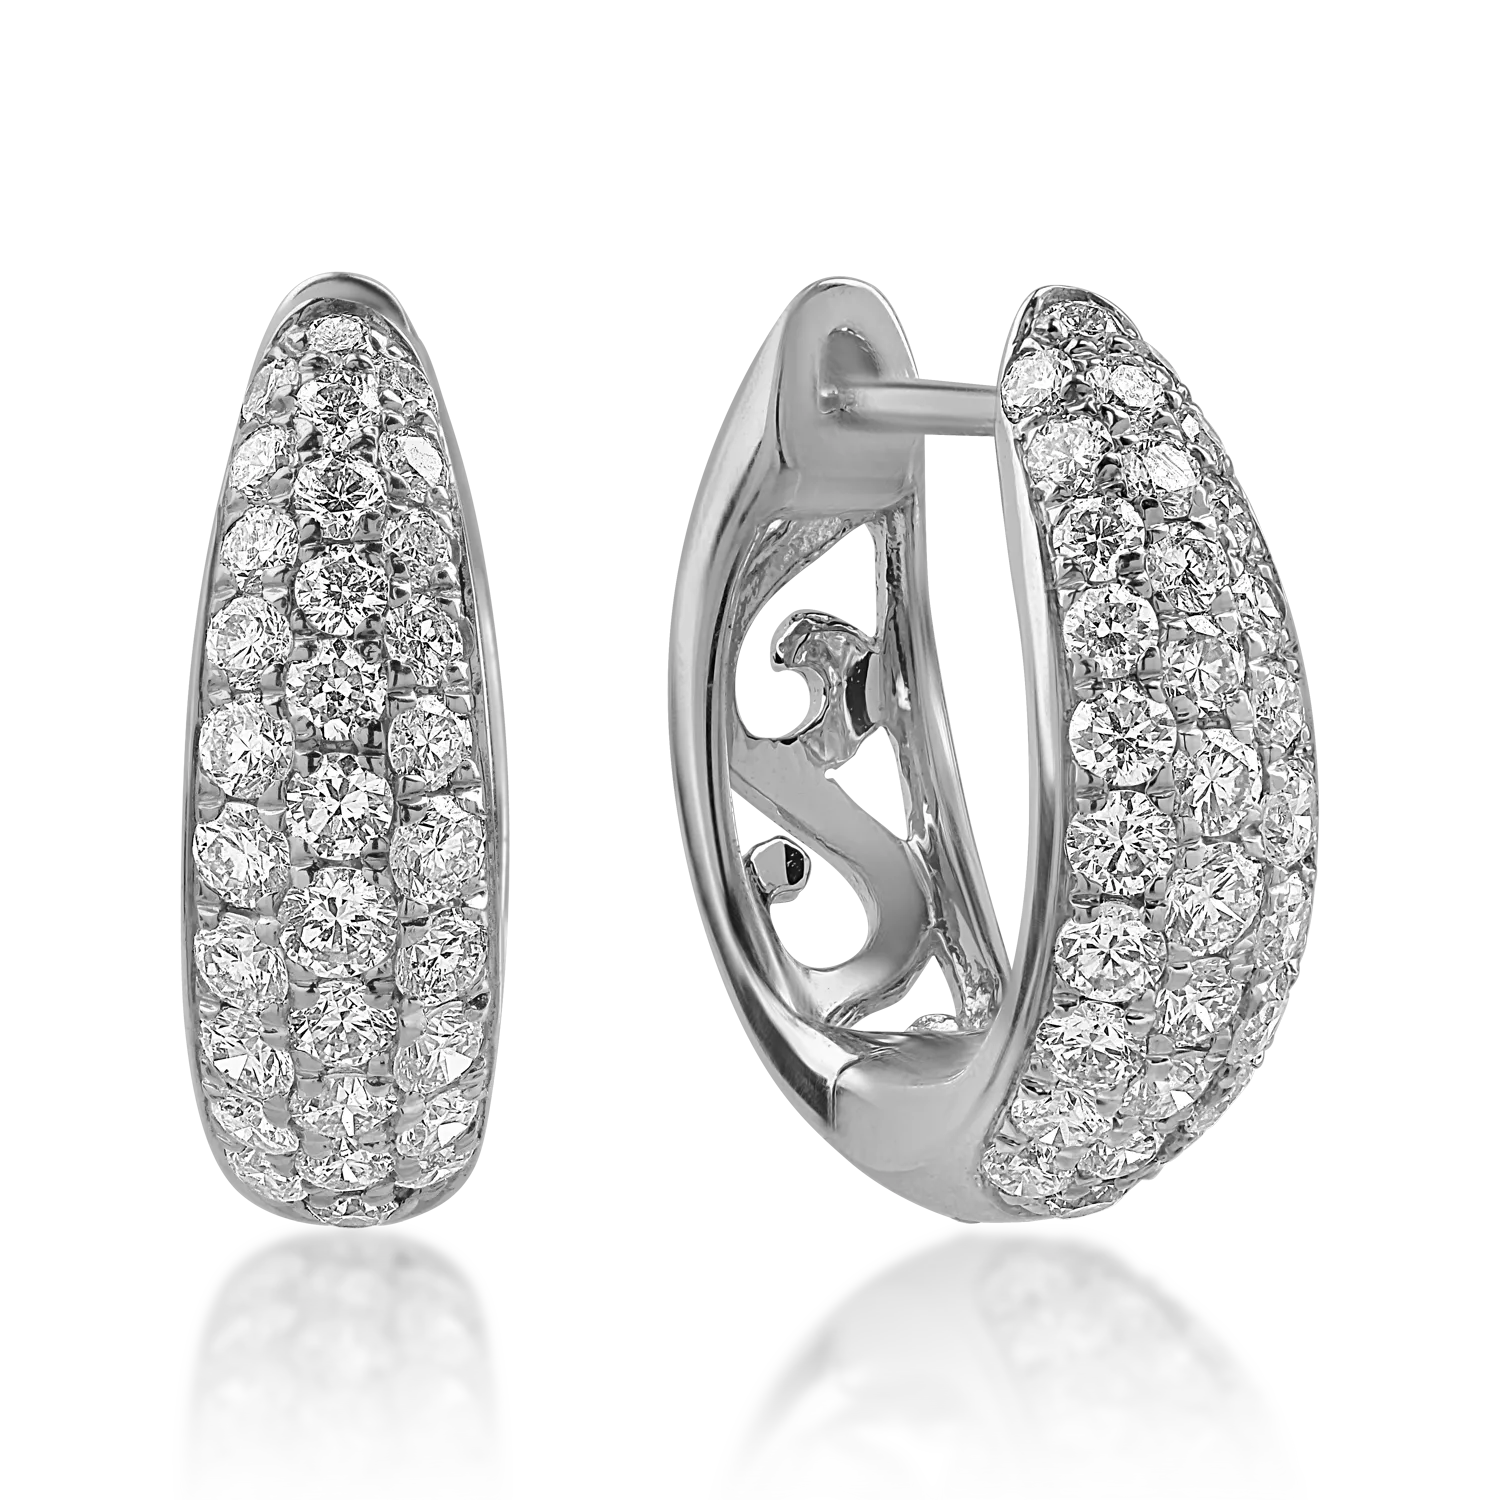 White gold earrings with 0.72ct diamonds